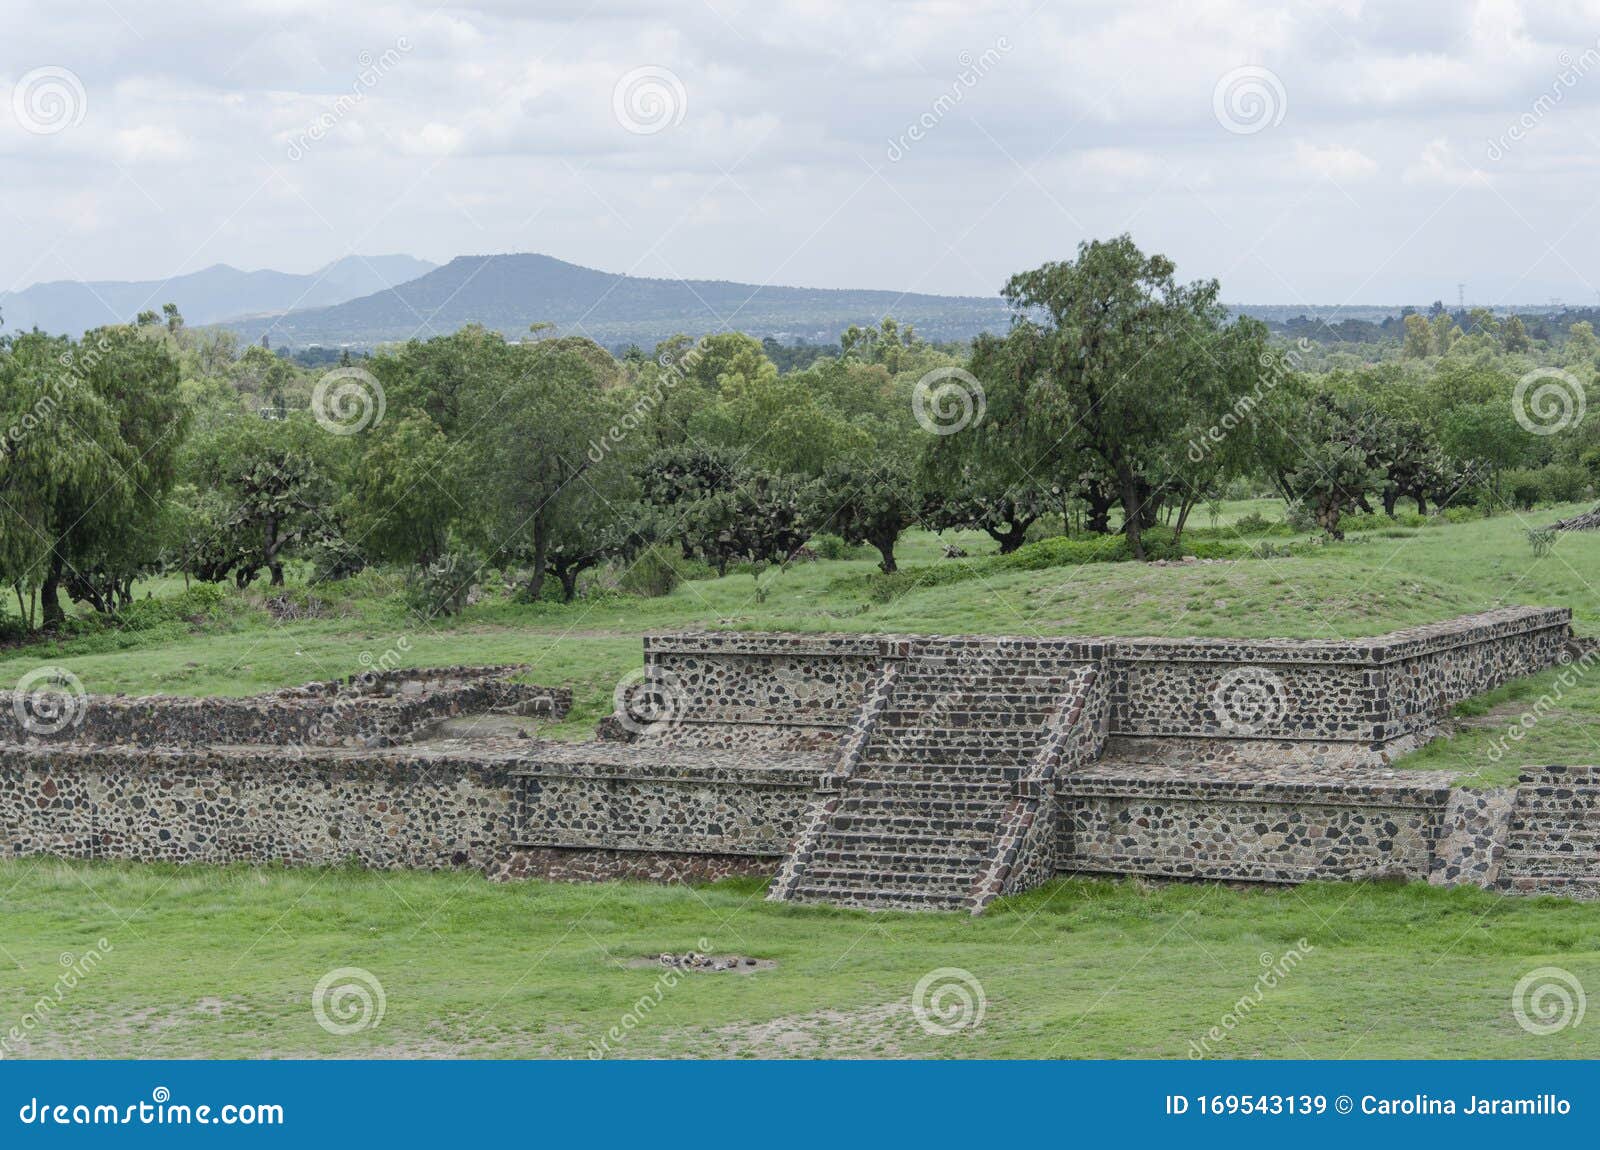 grass-covered pre-hispanic mesoamerican platforms in teotihuacan, mexico